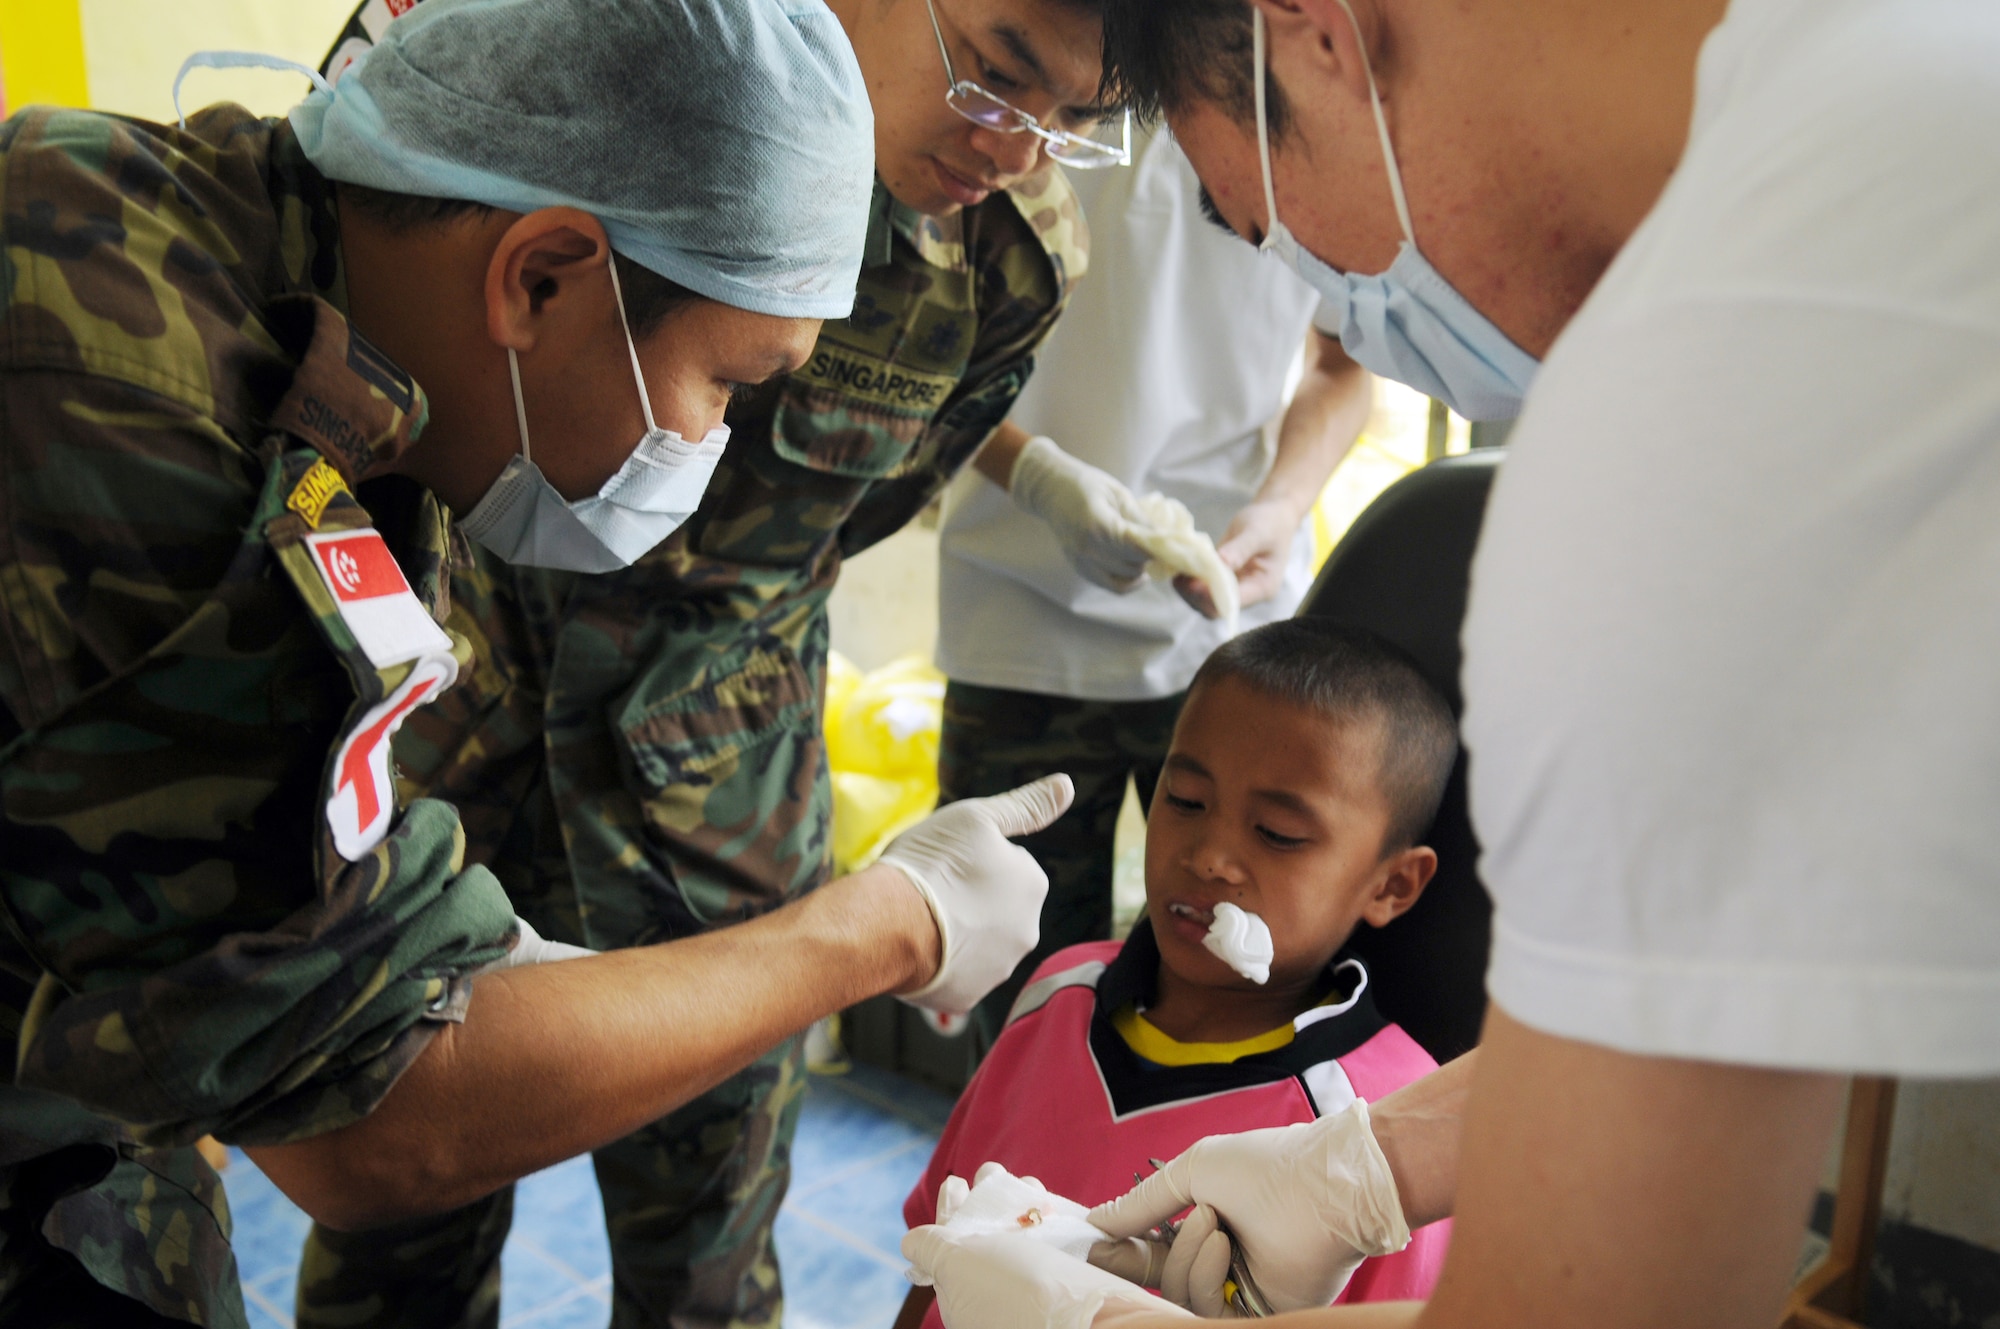 A team of Singaporean Dentists give a thumbs-up after performing a tooth extraction during a joint and multinational humanitarian mission to provide much needed dental care to Thailand's underprivileged during Cope Tiger 2009 on March 16. Cope Tiger is an annual exercise held in Thailand to improve combat readiness and combined and joint interoperability of U.S., Thai and Singaporean forces while enhancing regional security and providing humanitarian support. (U.S. Air Force photo/Staff Sgt. Angelique Perez)